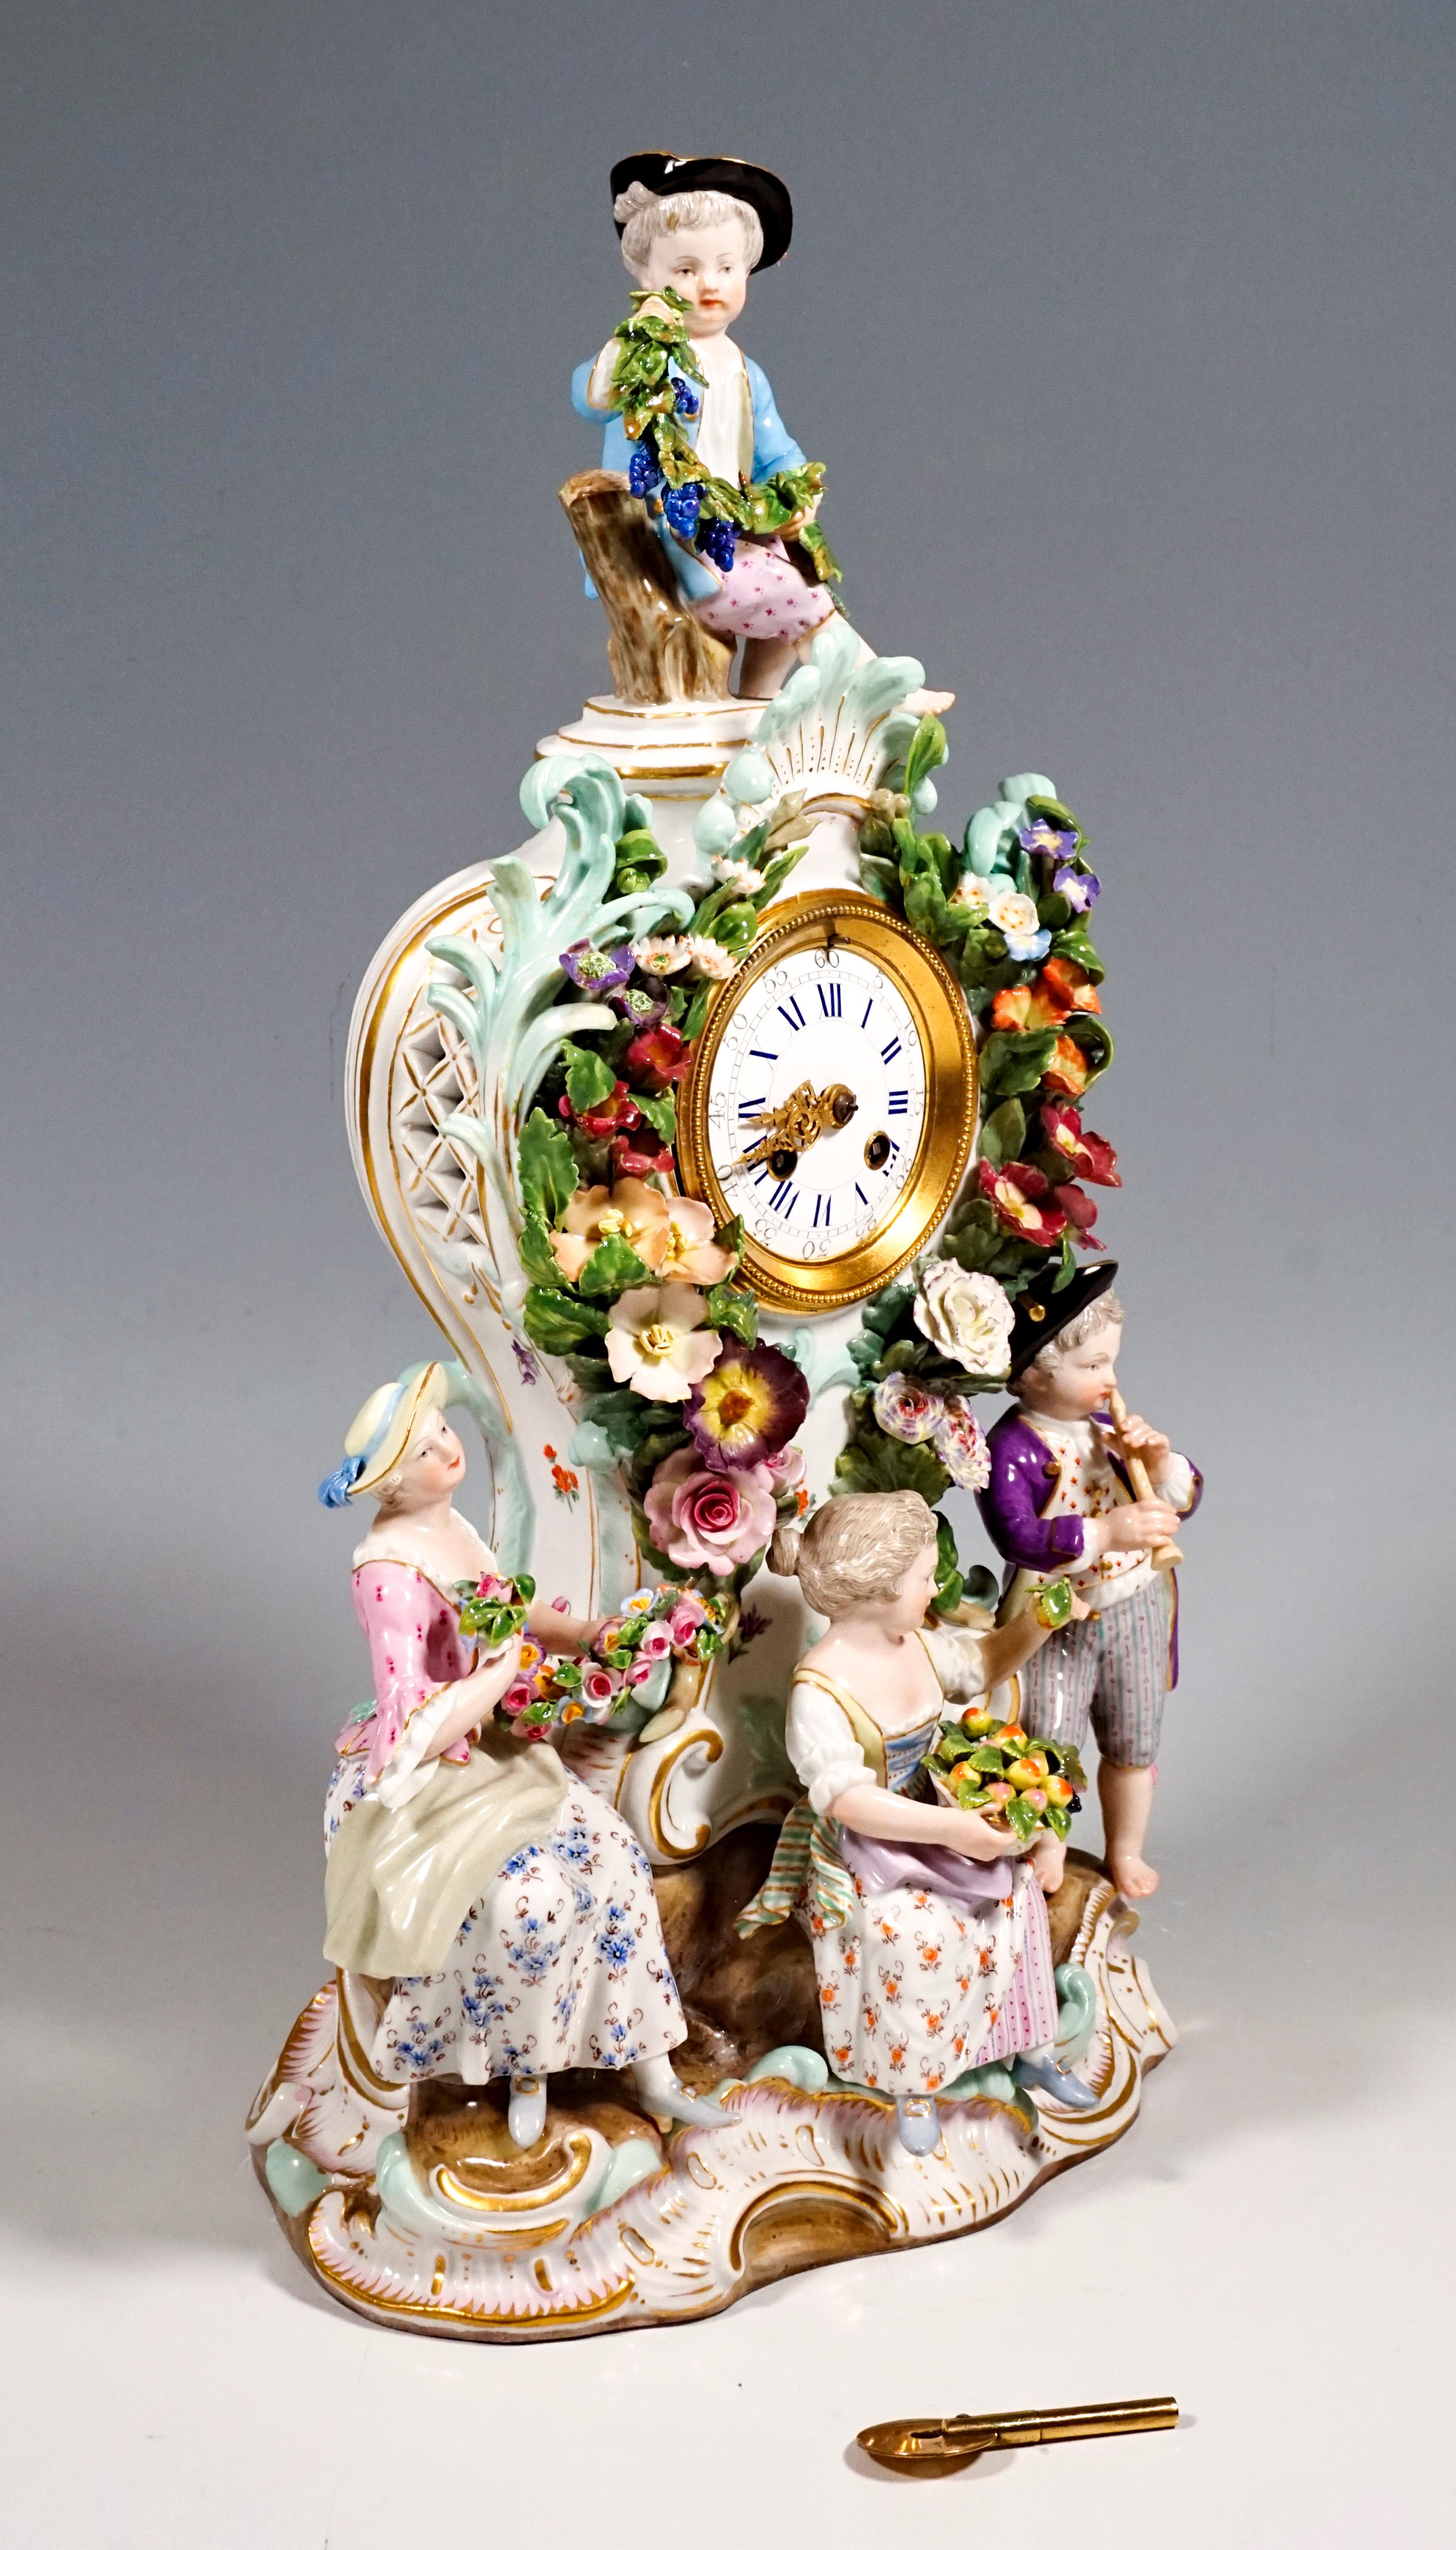 The clock was designed by Leuteritz in Rococo style using old shapes: the clock case rises on a rock base with gold rocailles, richly decorated with delicate, three-dimensional flowers, leaves and rocailles that play around the dial. Below three